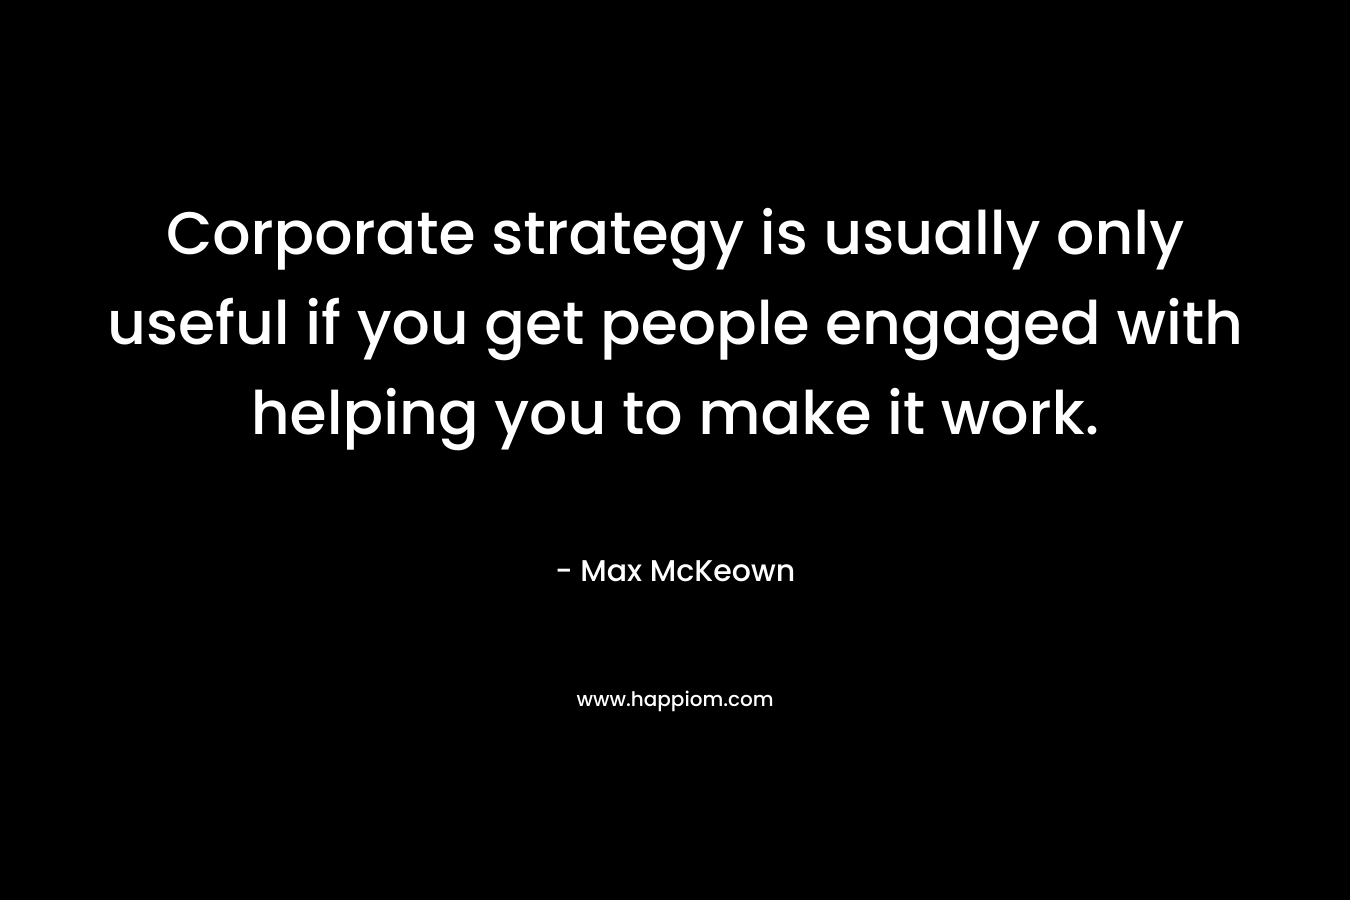 Corporate strategy is usually only useful if you get people engaged with helping you to make it work.